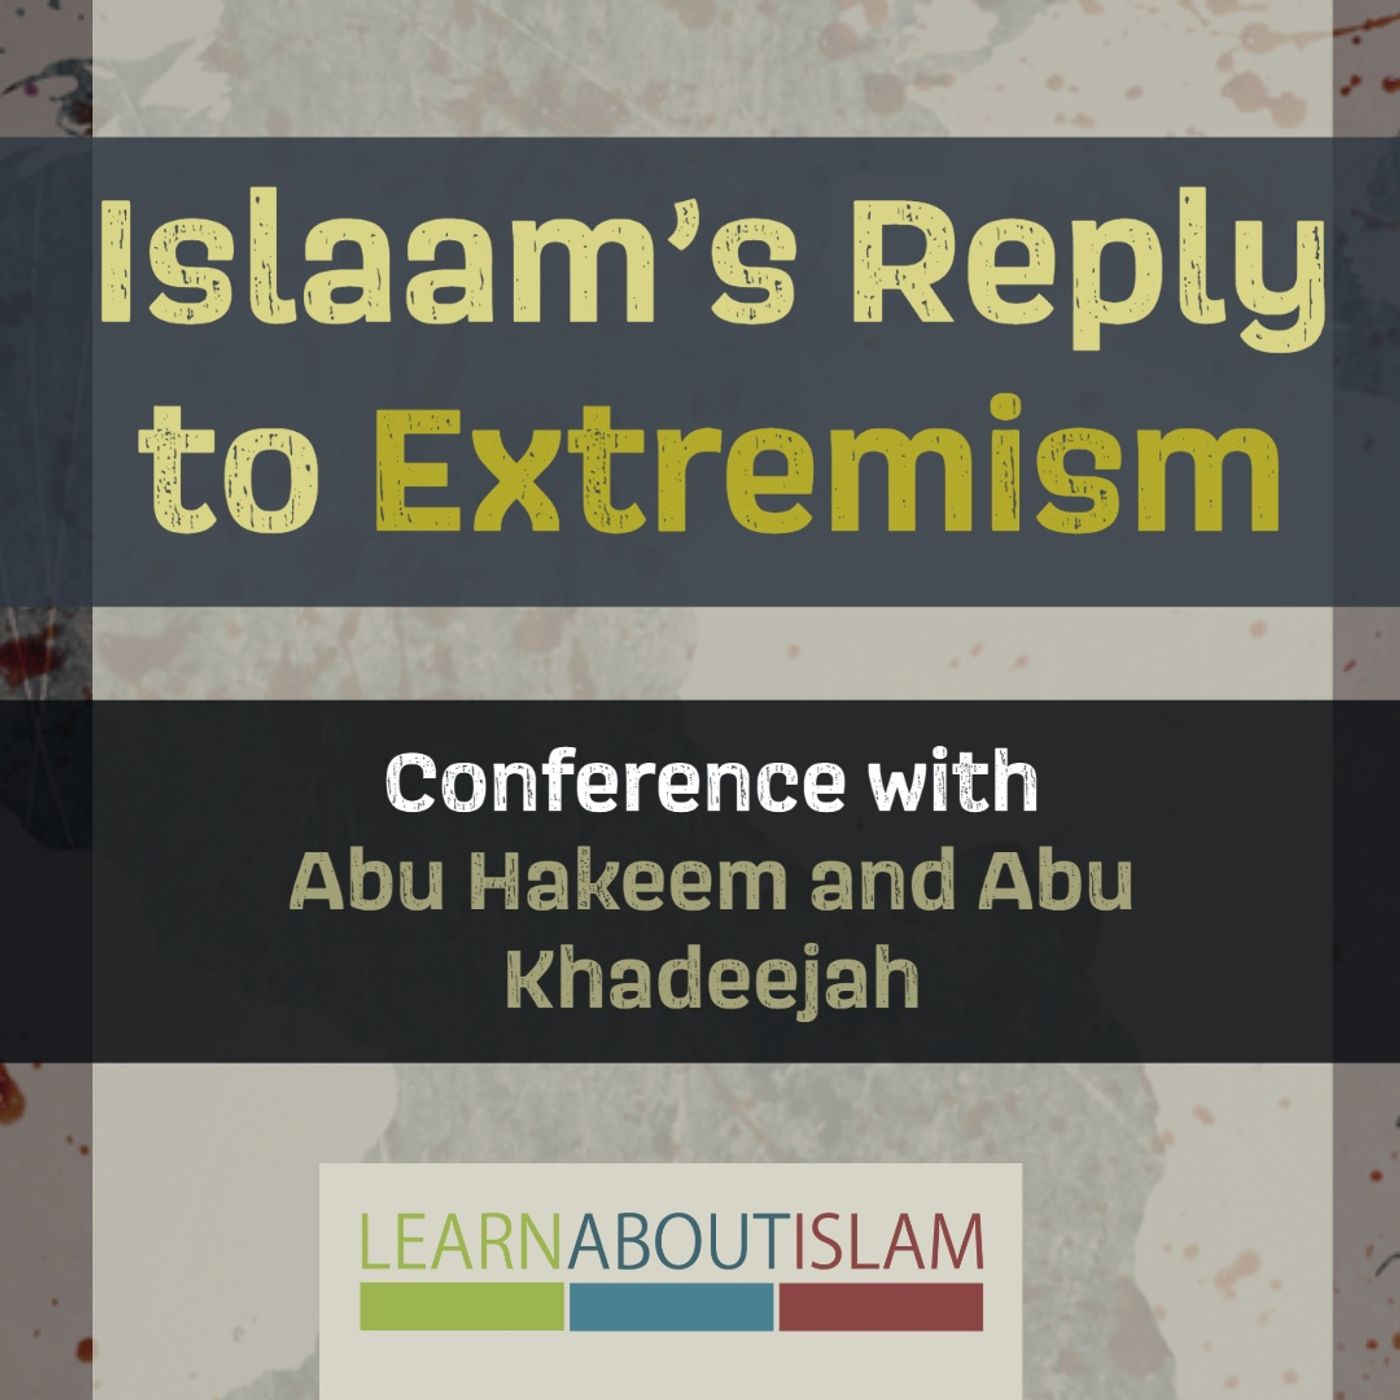 Islaam's Reply to Extremism - Abu Khadeejah Part 2